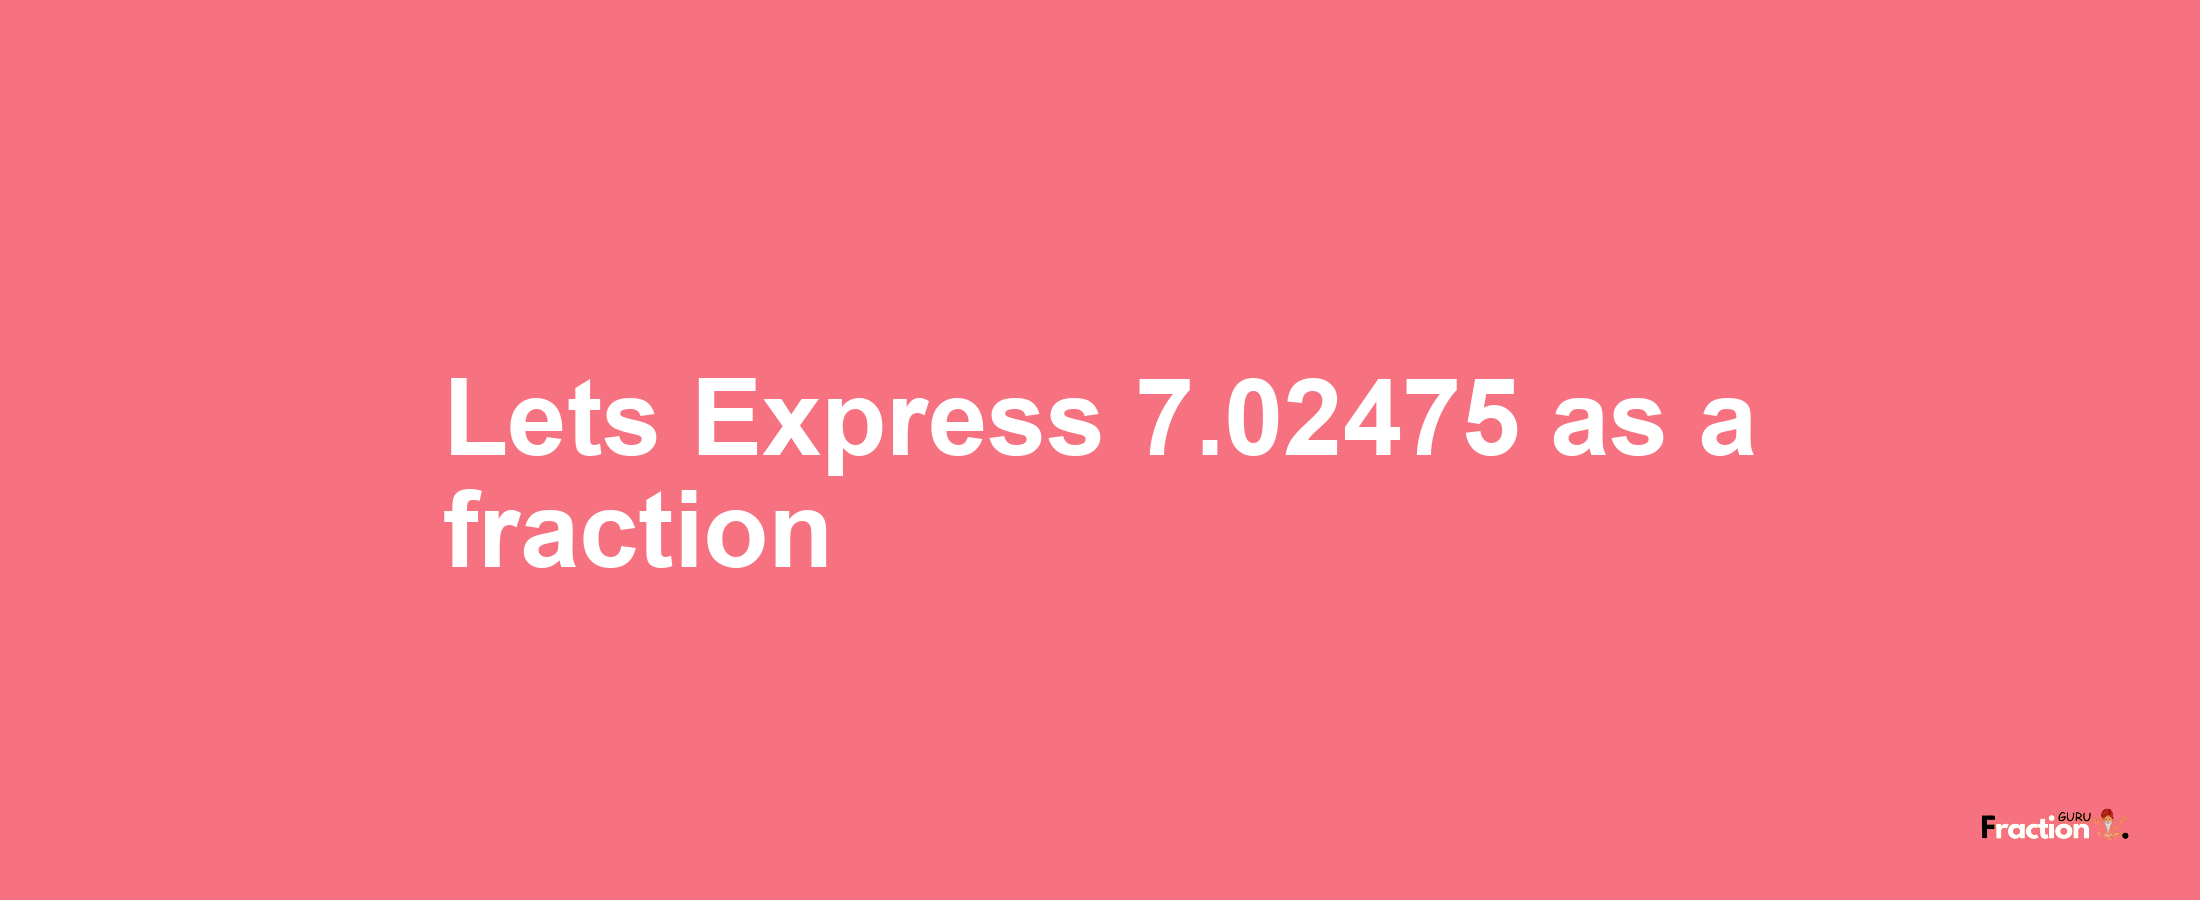 Lets Express 7.02475 as afraction